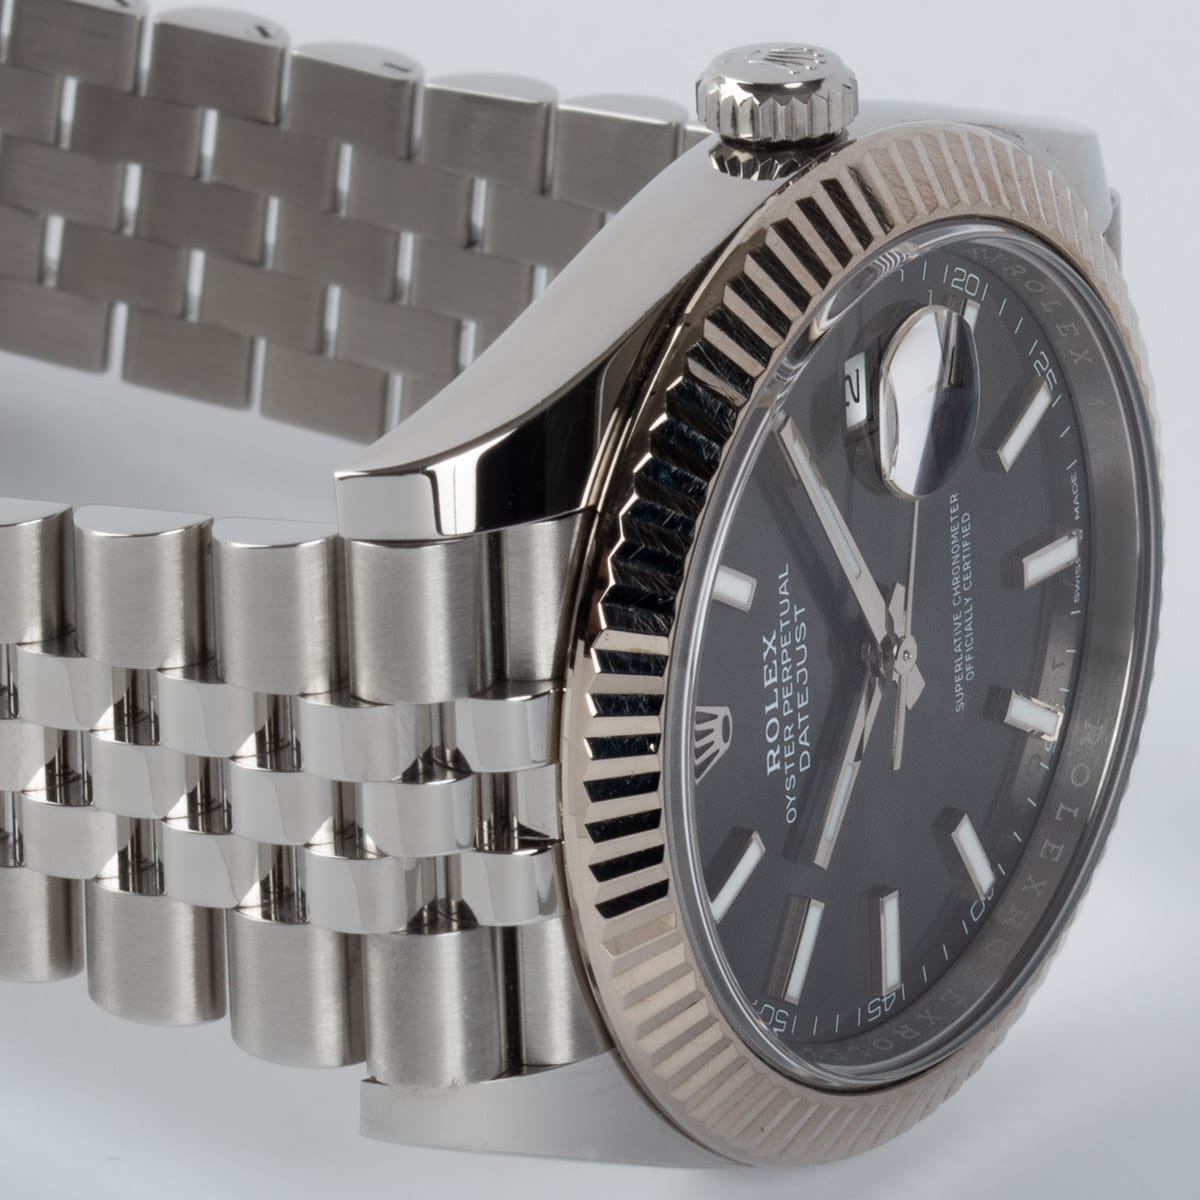 Dial Shot of Datejust 41